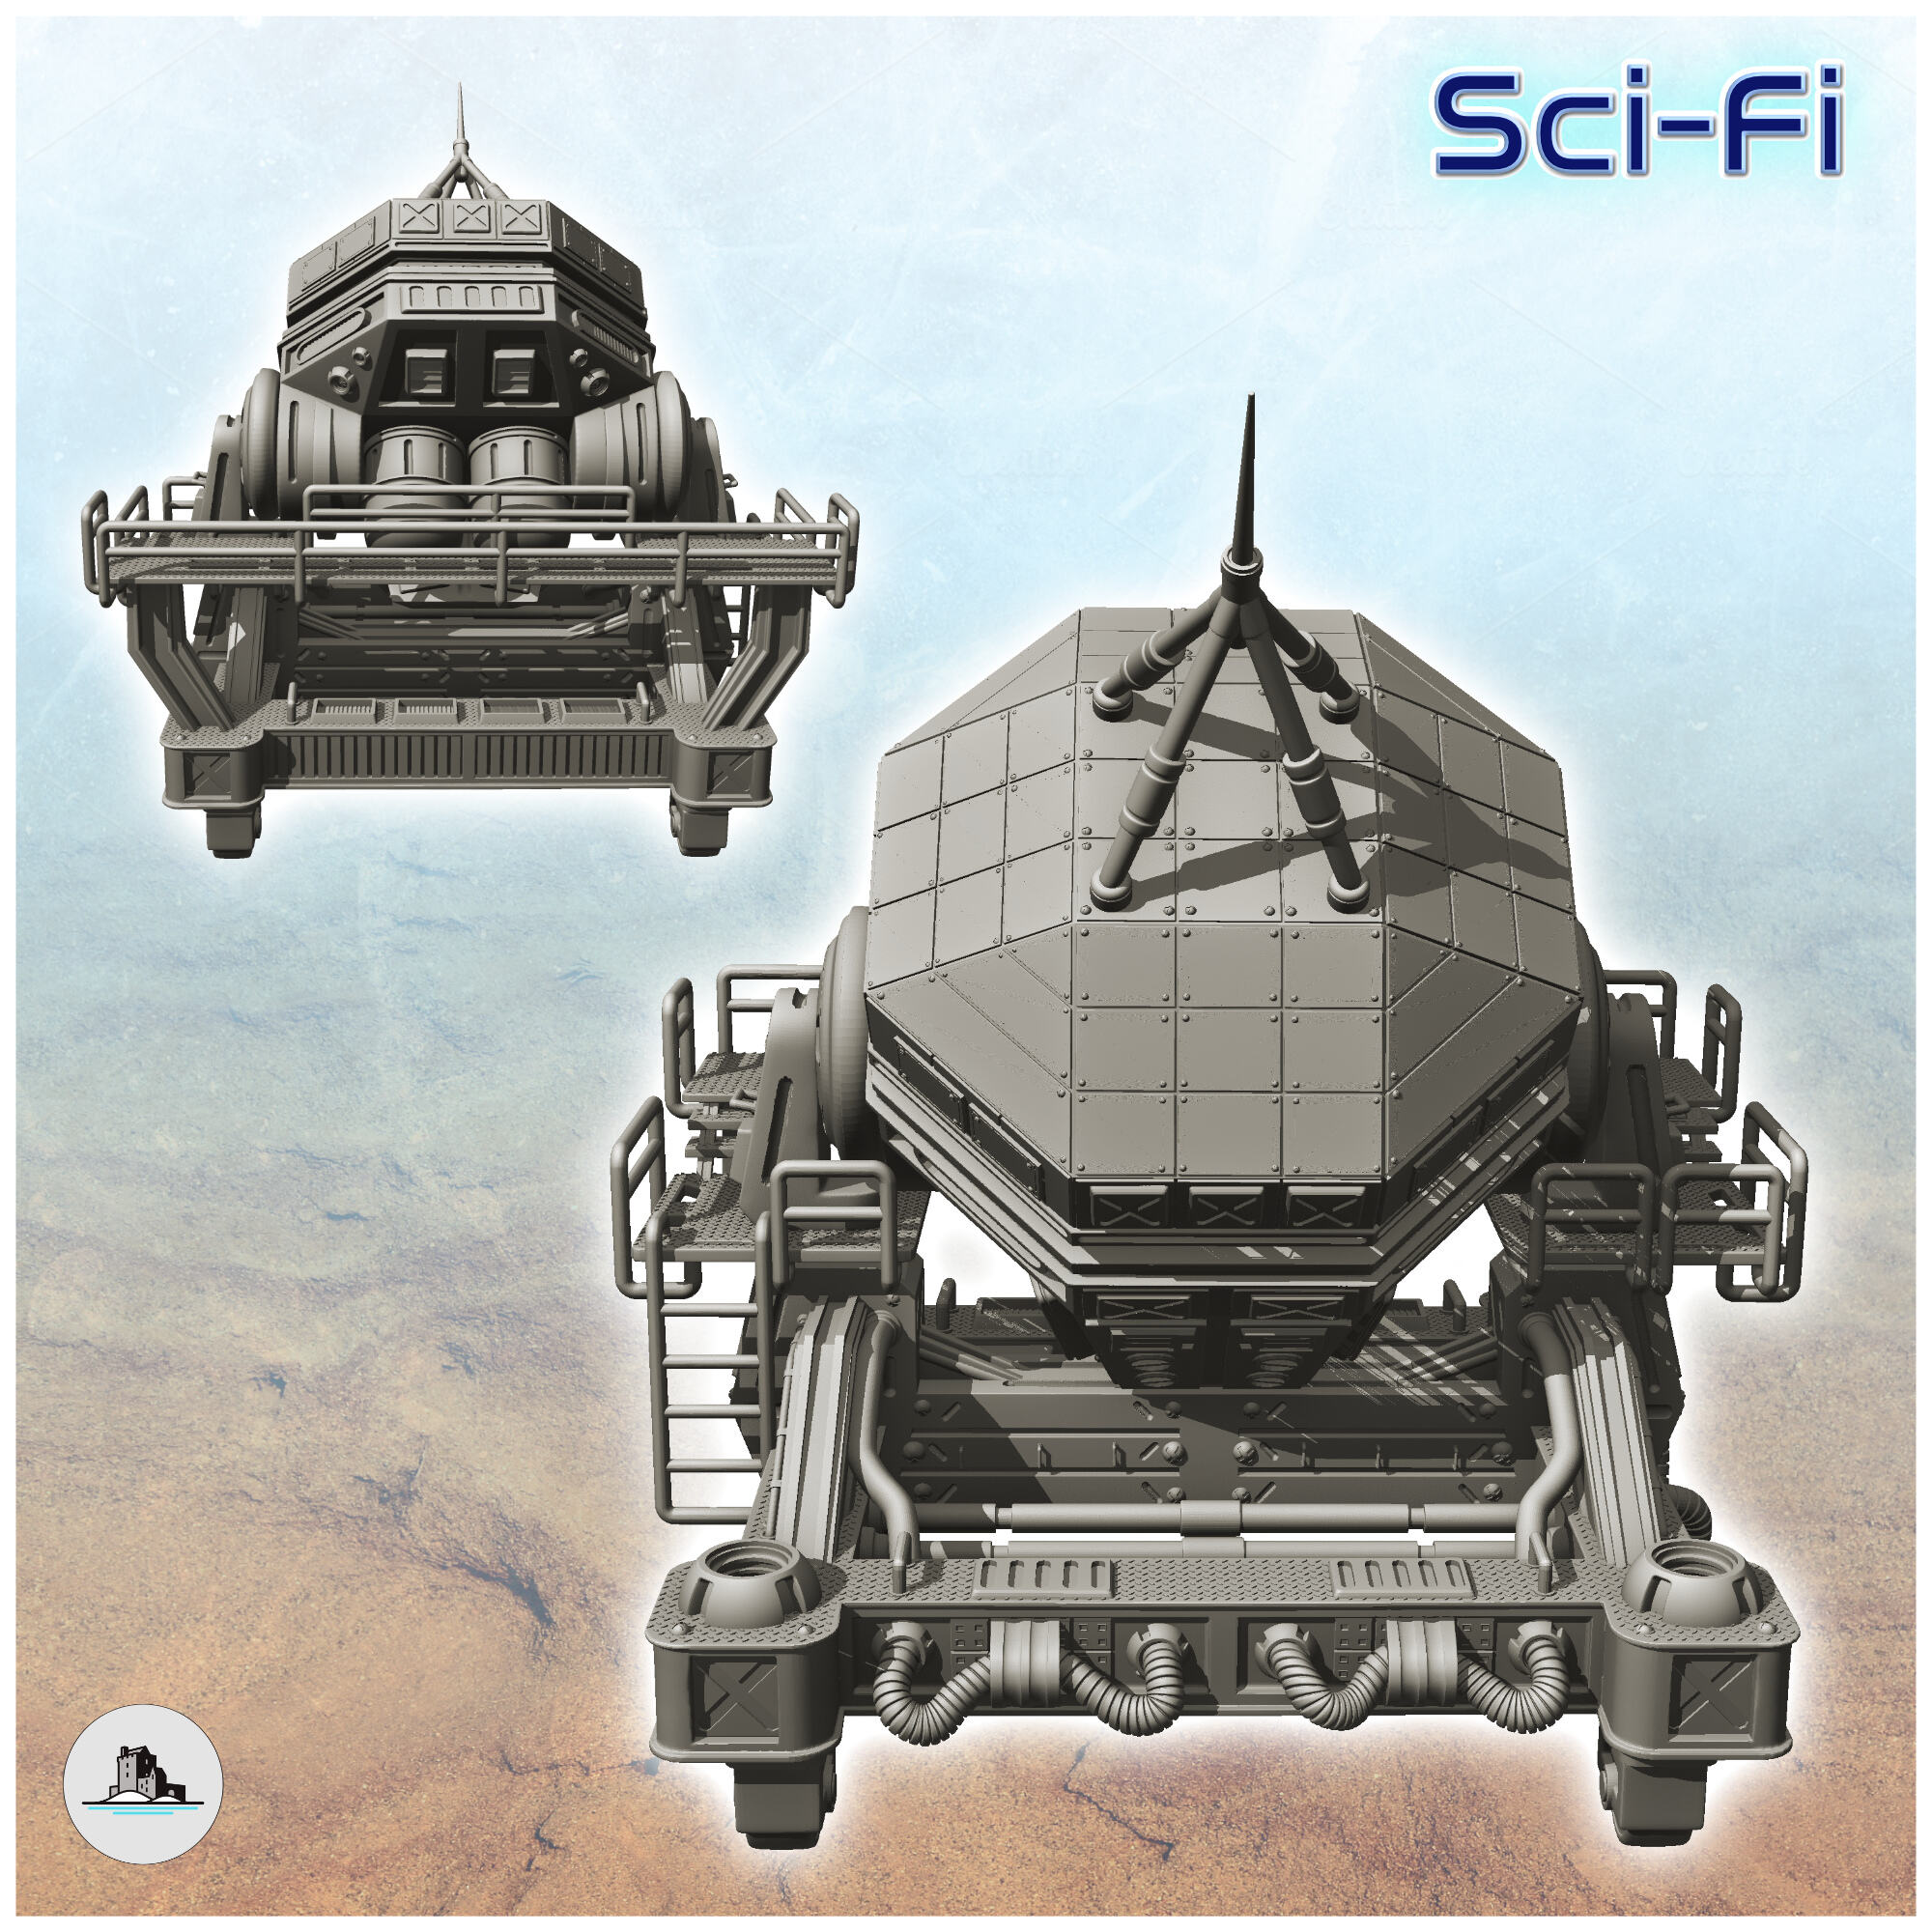 Large space antenna - Terrain Scifi Science fiction SF